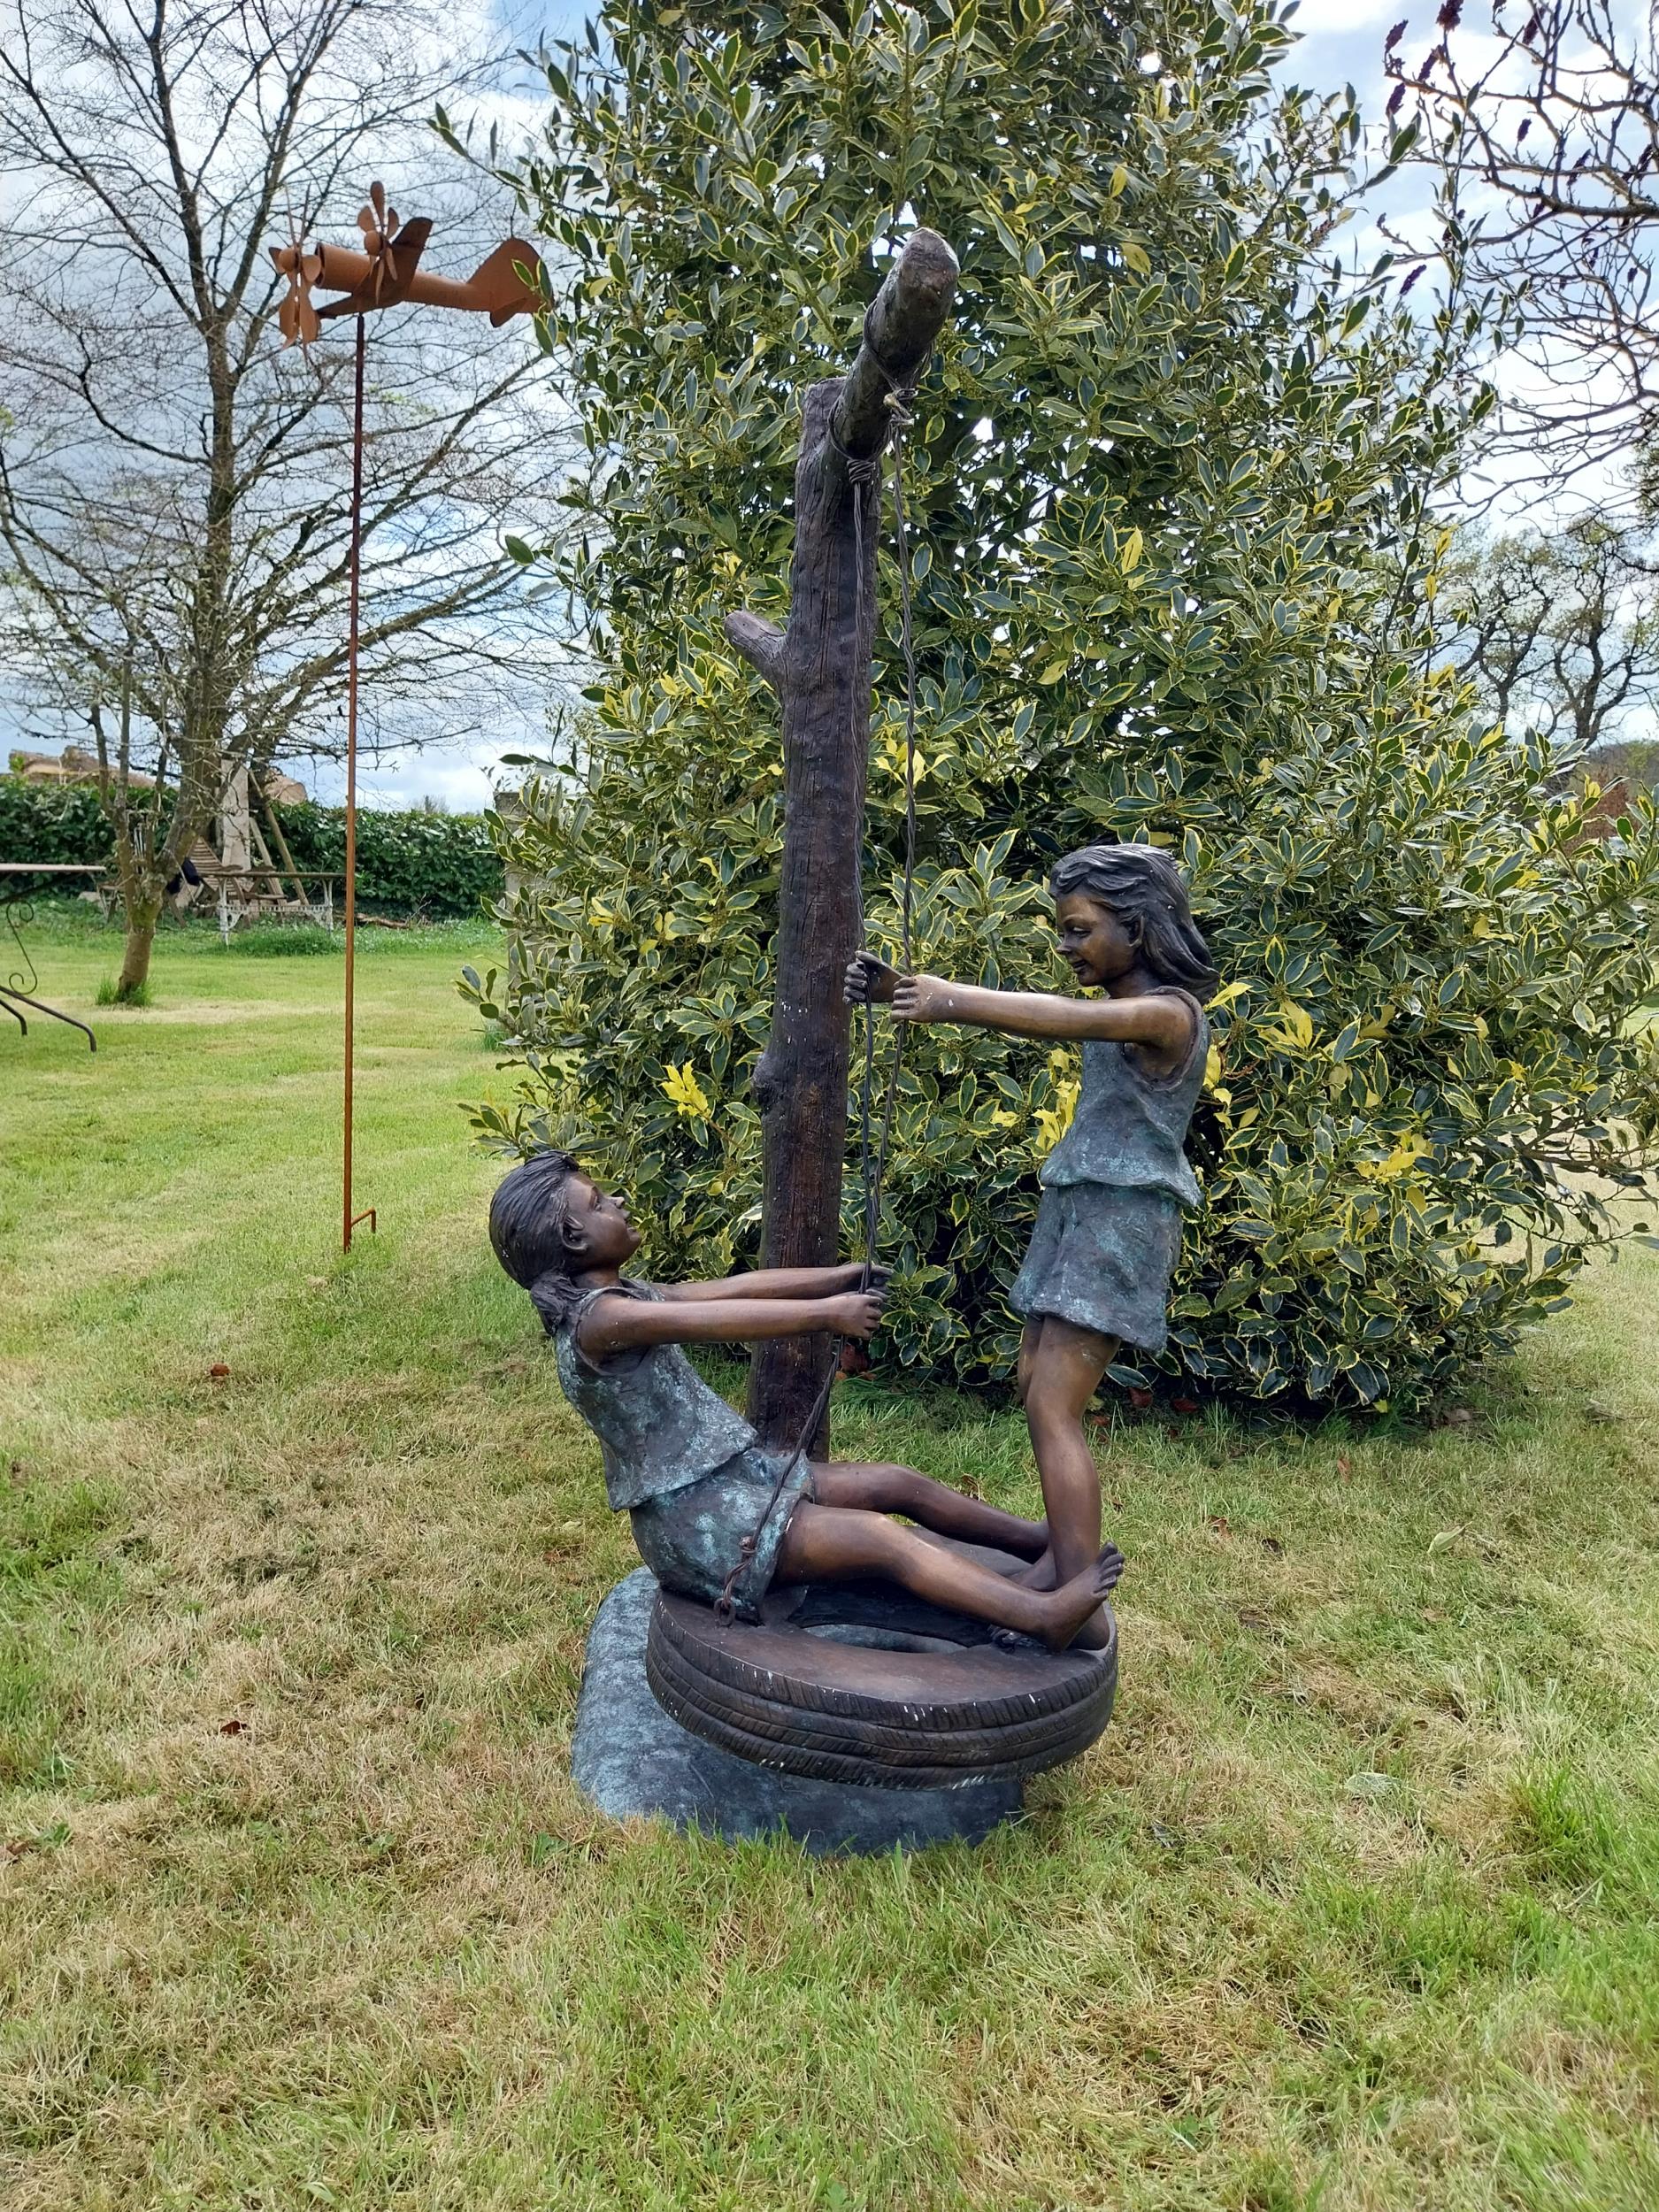 Exceptional quality bronze sculpture of Girls on swing {140 cm H x 65 cm W x 71 cm D}. - Image 3 of 6